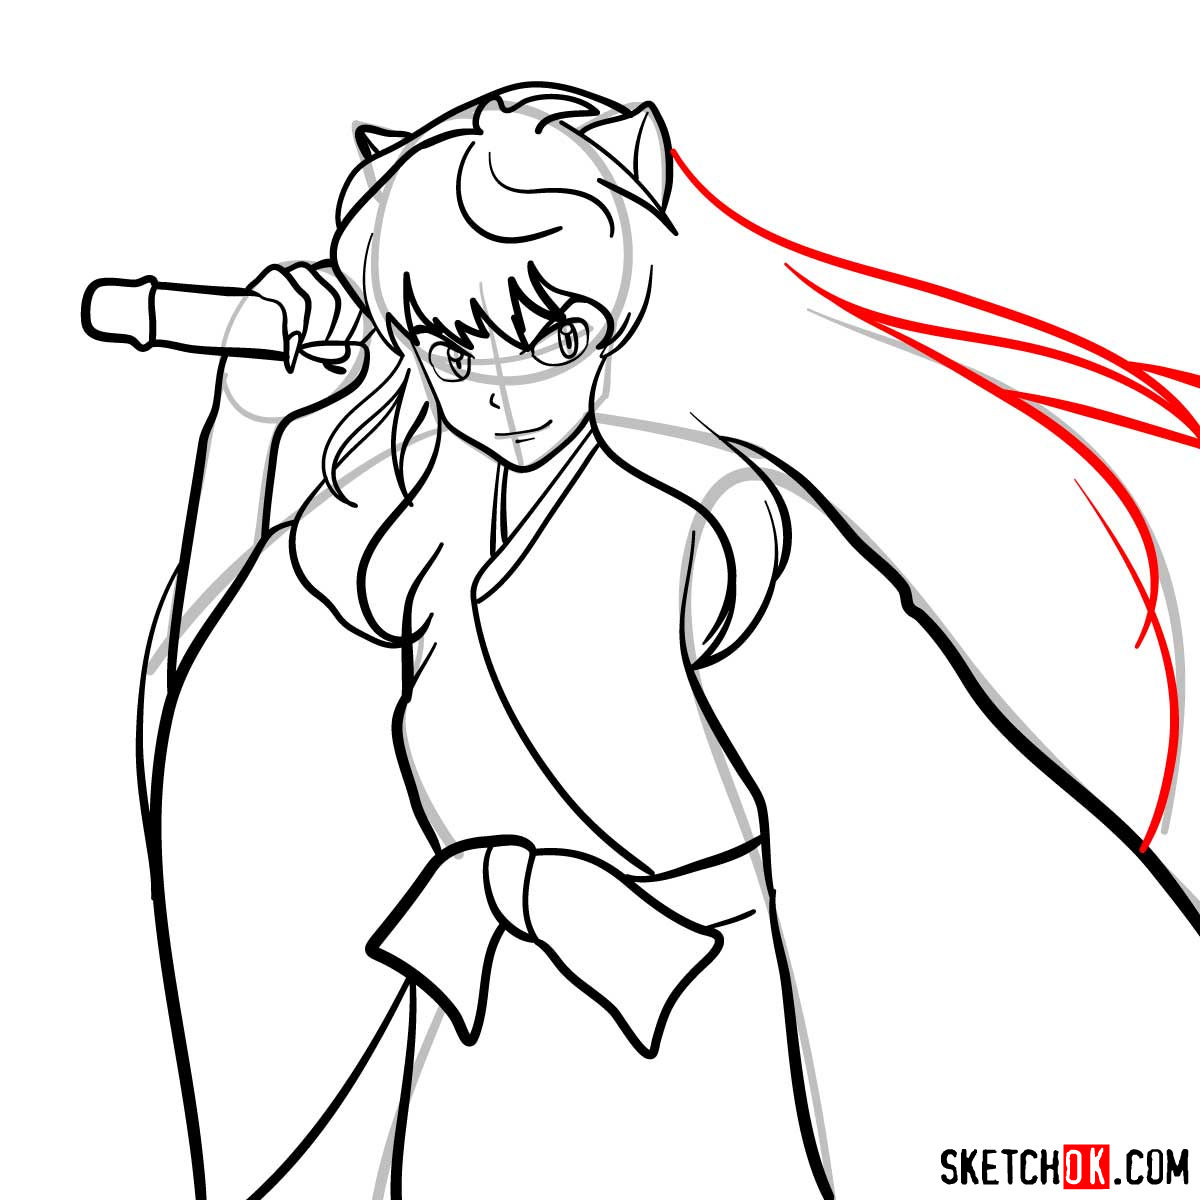 How to draw Inuyasha - 12 steps tutorial - step 11